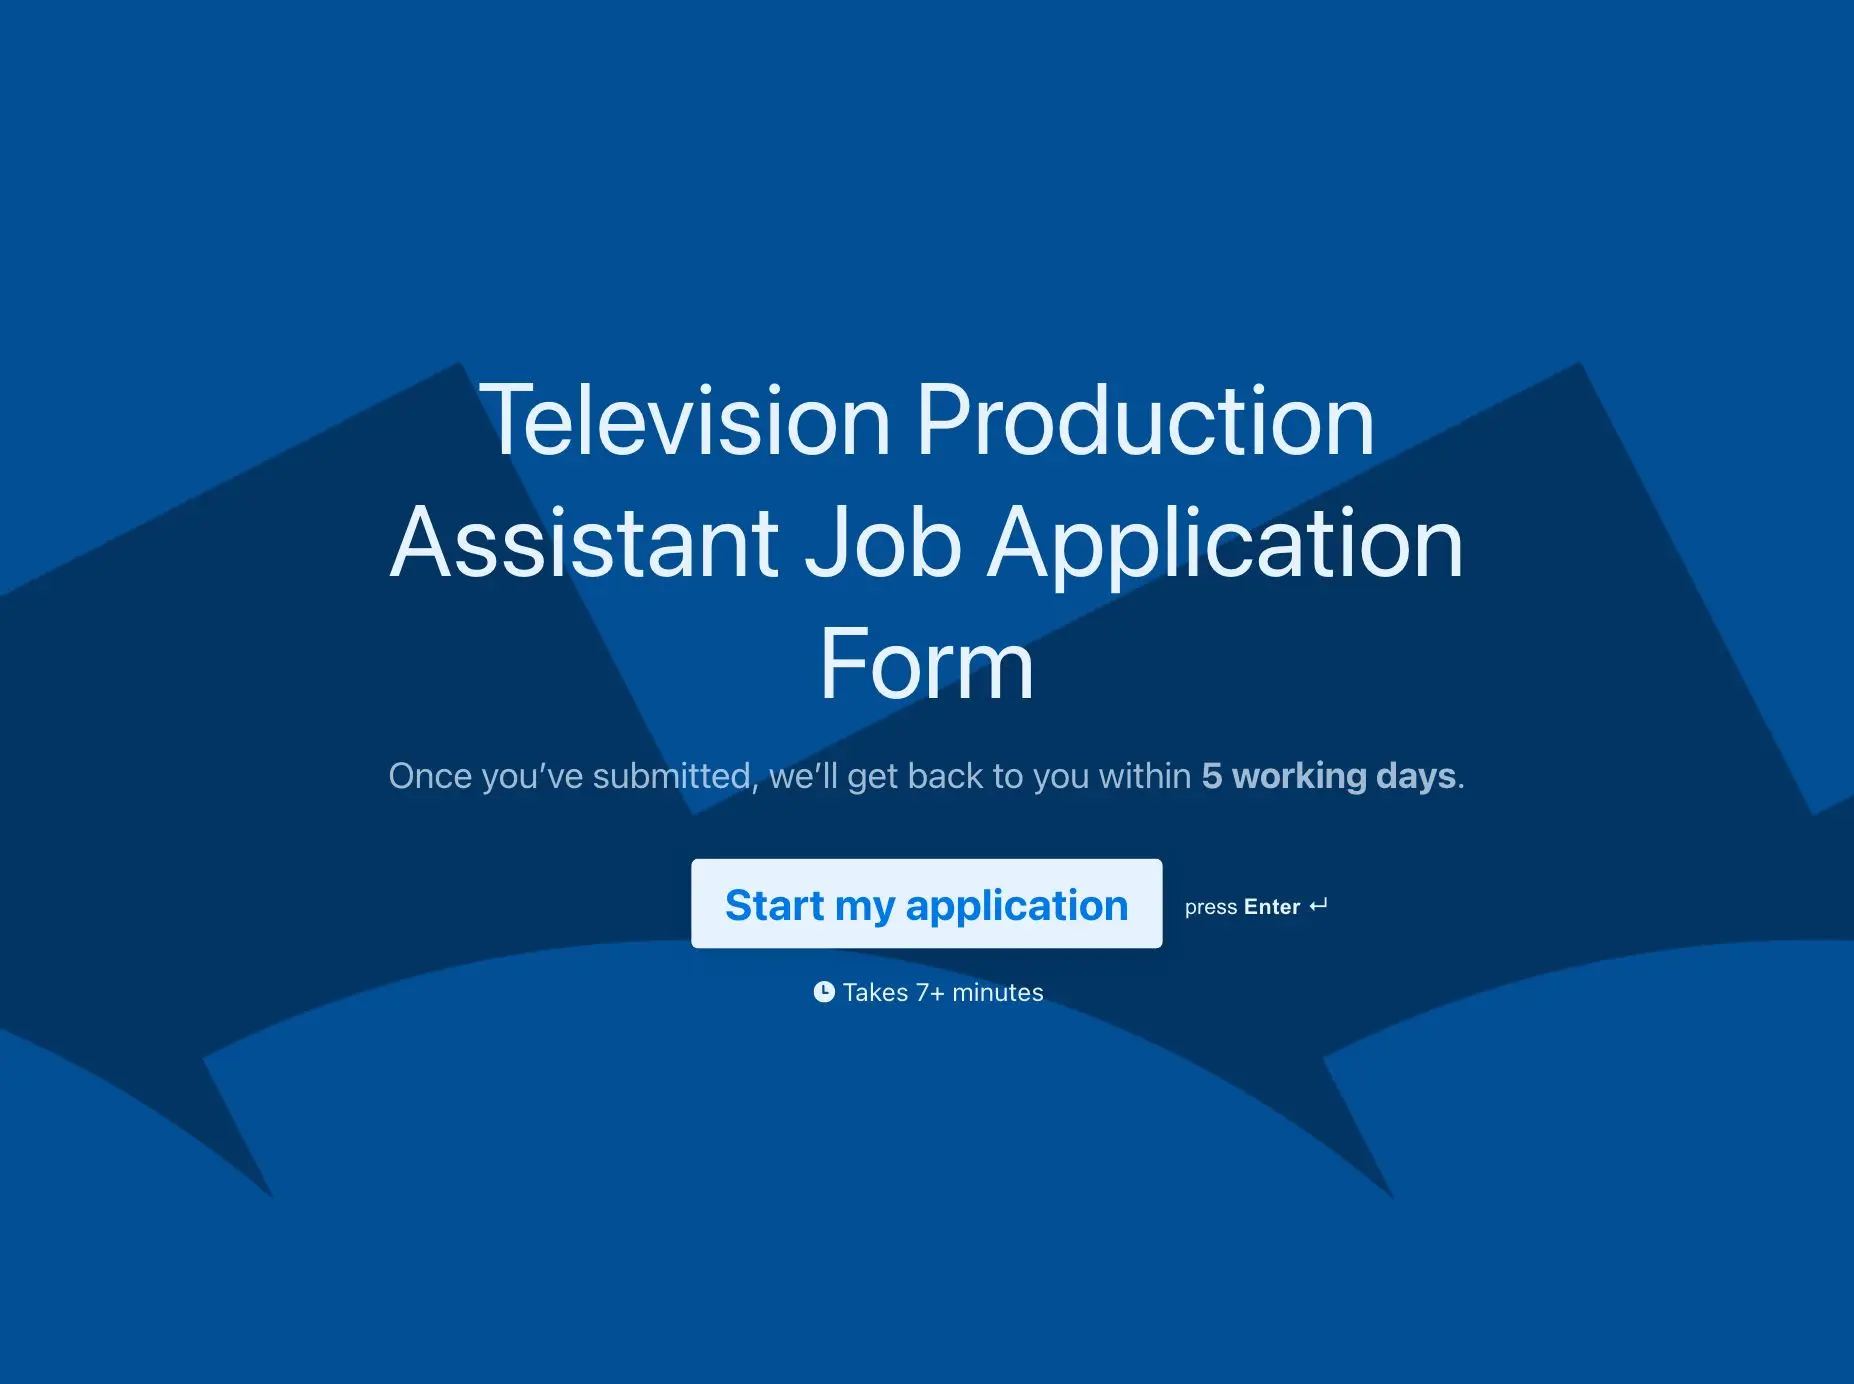 Television Production Assistant Job Application Form Template Hero